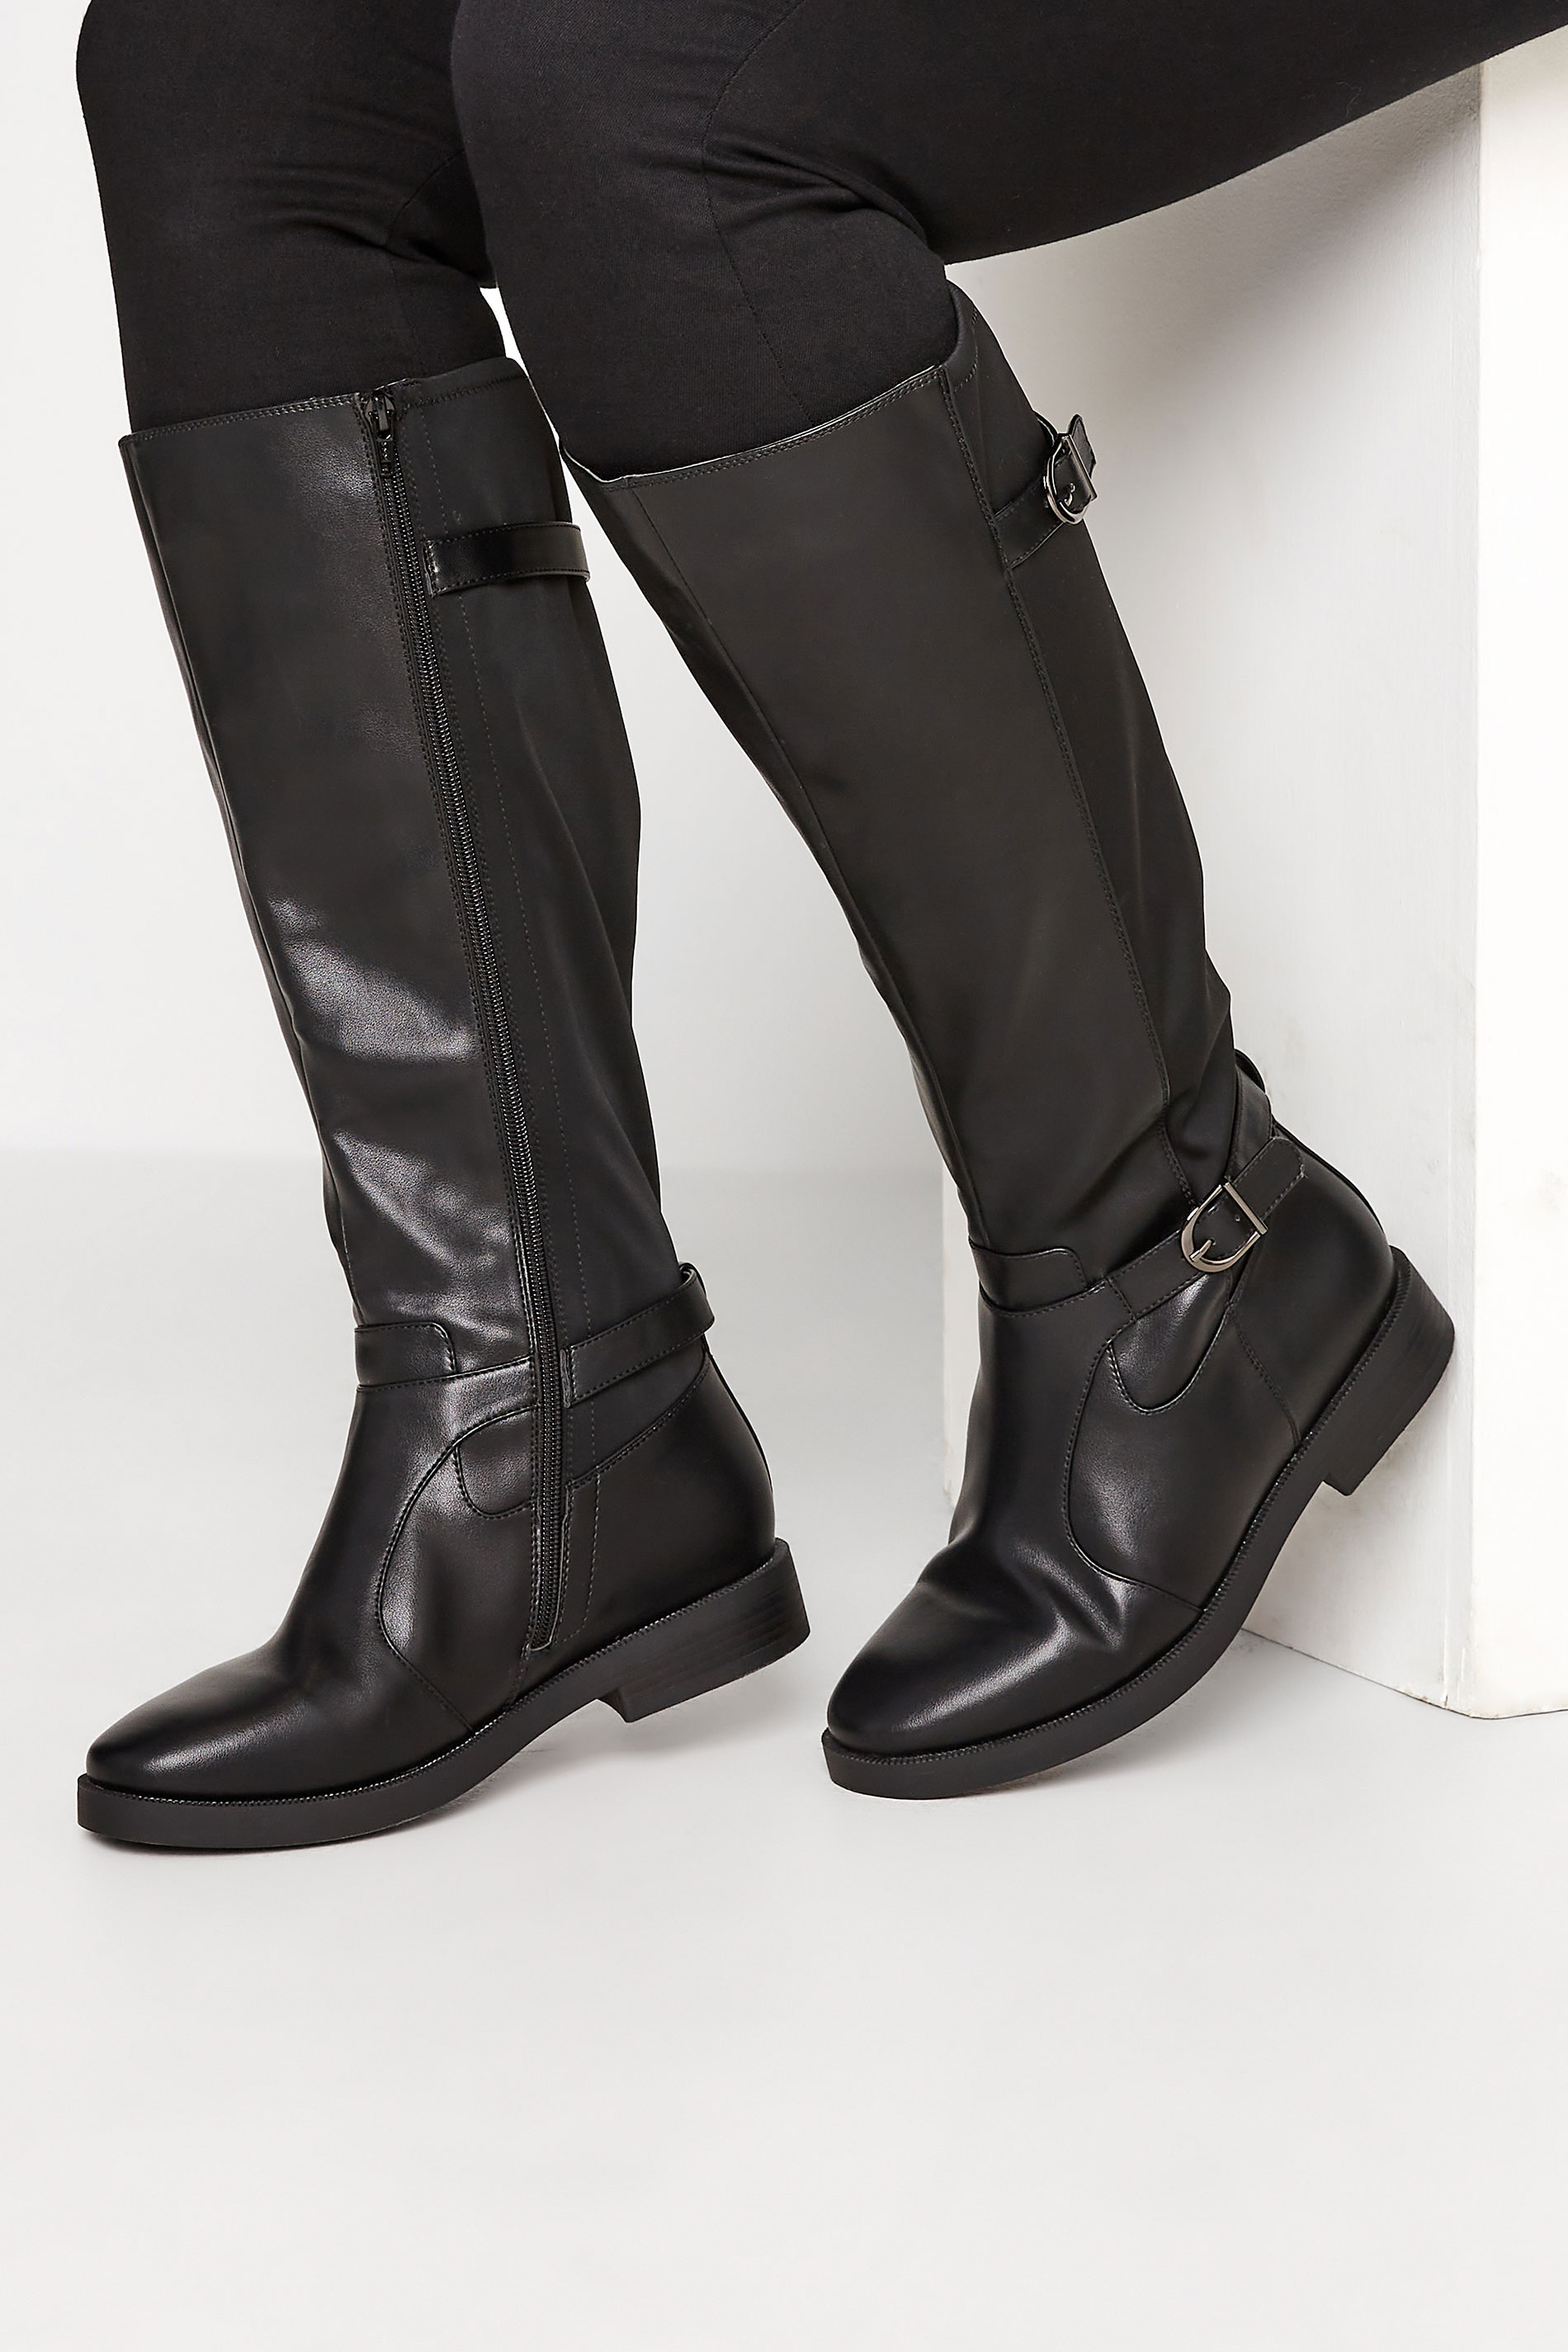 Black Double Strap Knee High Boots In Wide E Fit & Extra Wide EEE Fit | Yours Clothing 1